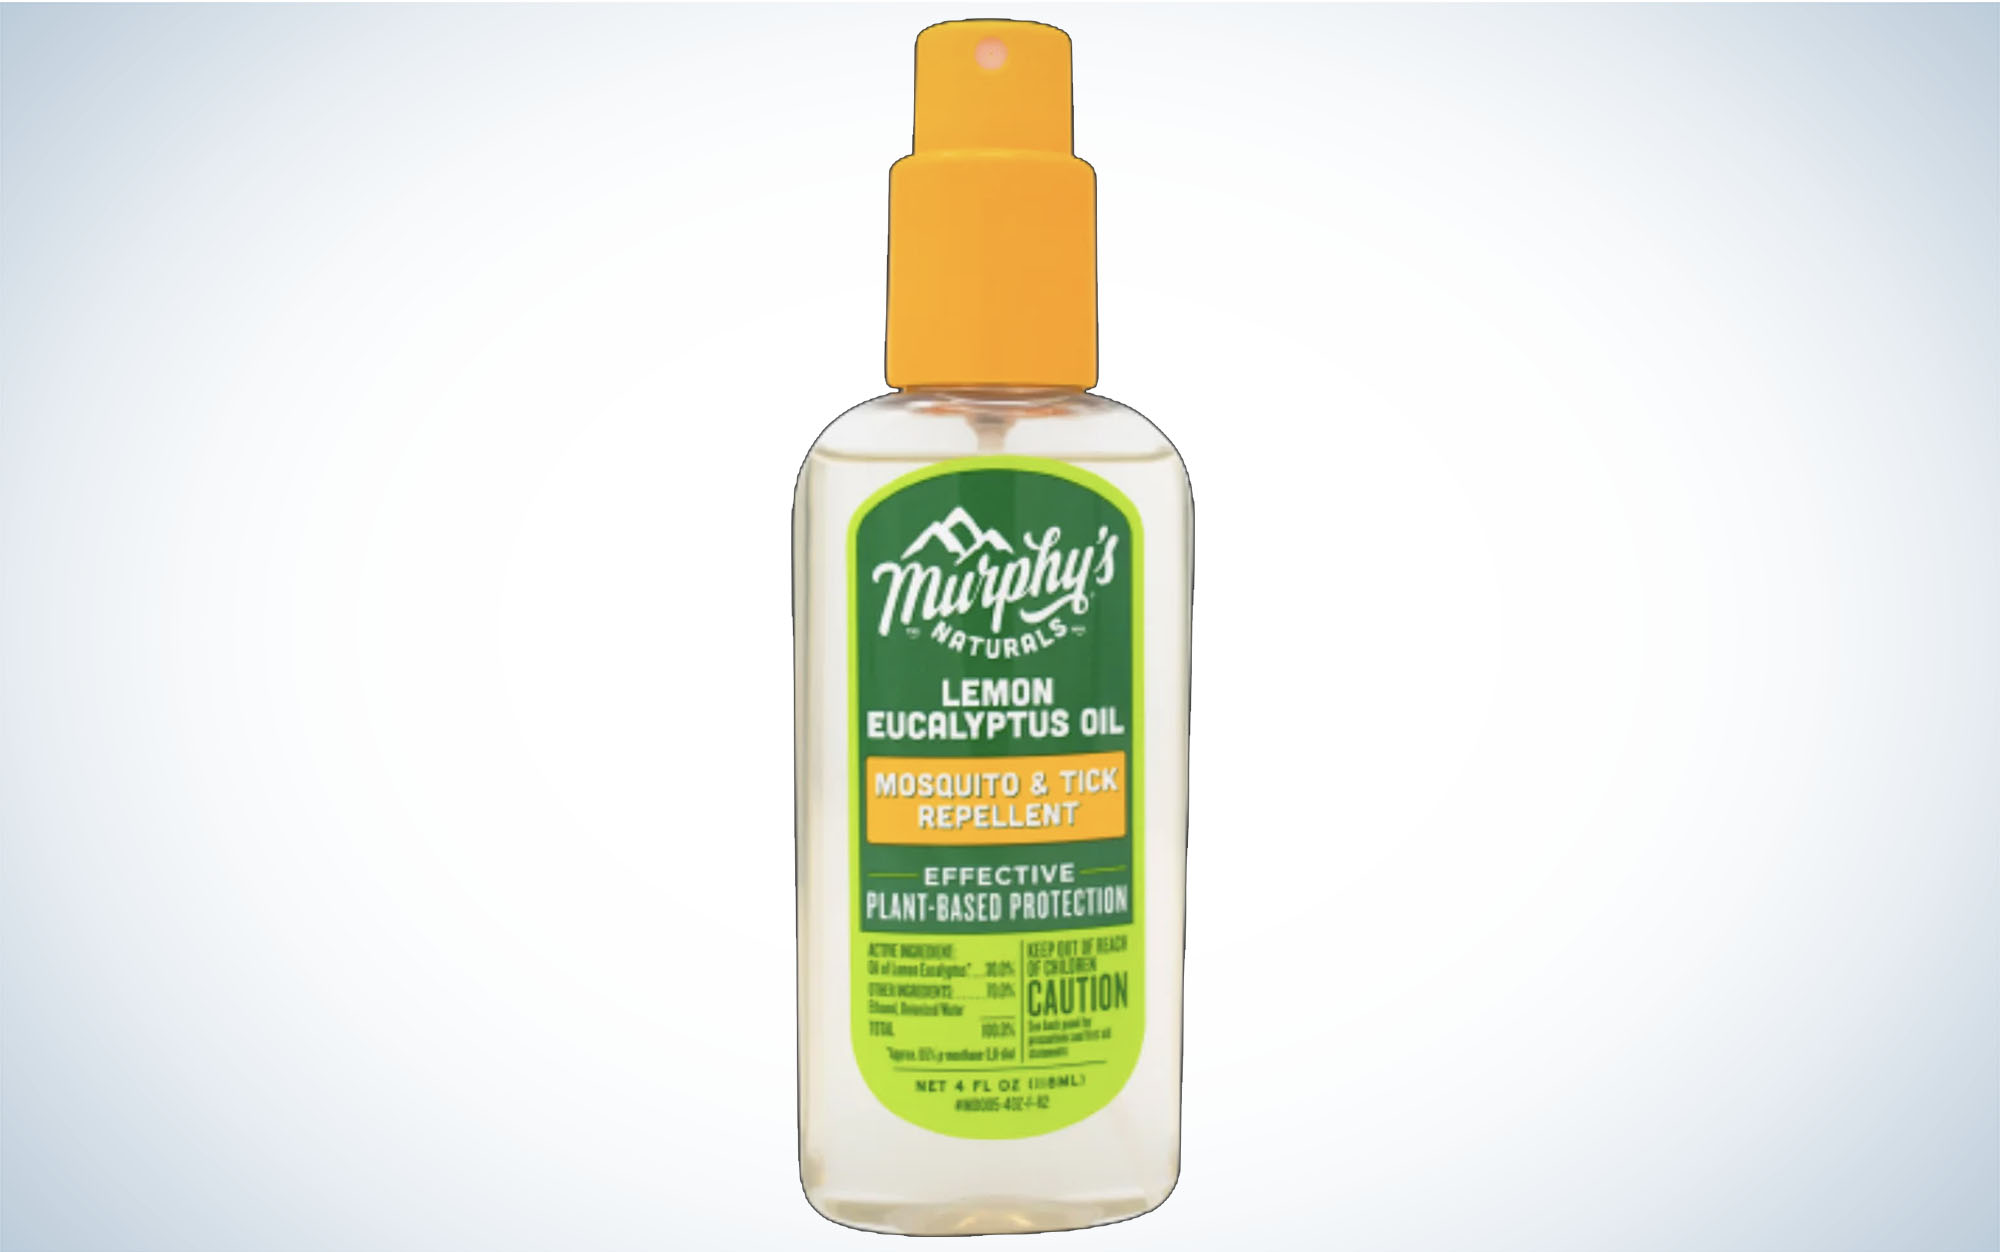 The Lemon Eucalyptus Oil Mosquito & Tick Repellent Spray is one of the the best natural repellent.